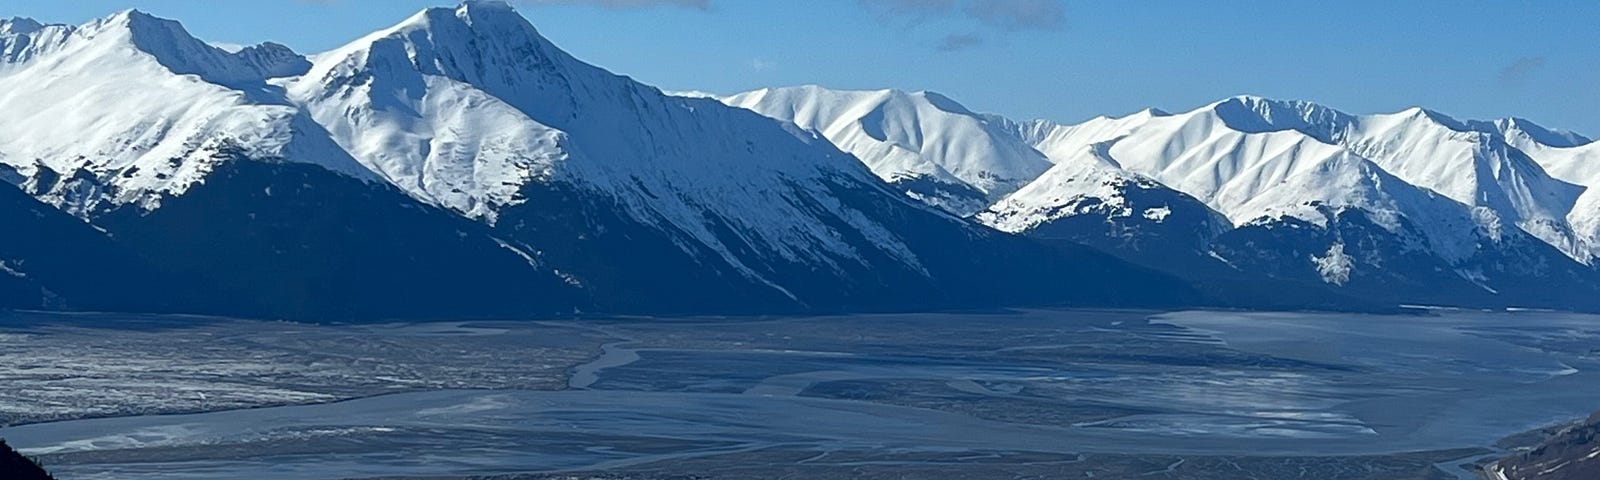 View from on top of a mountain looking out over an inlet and more snowy mountains.